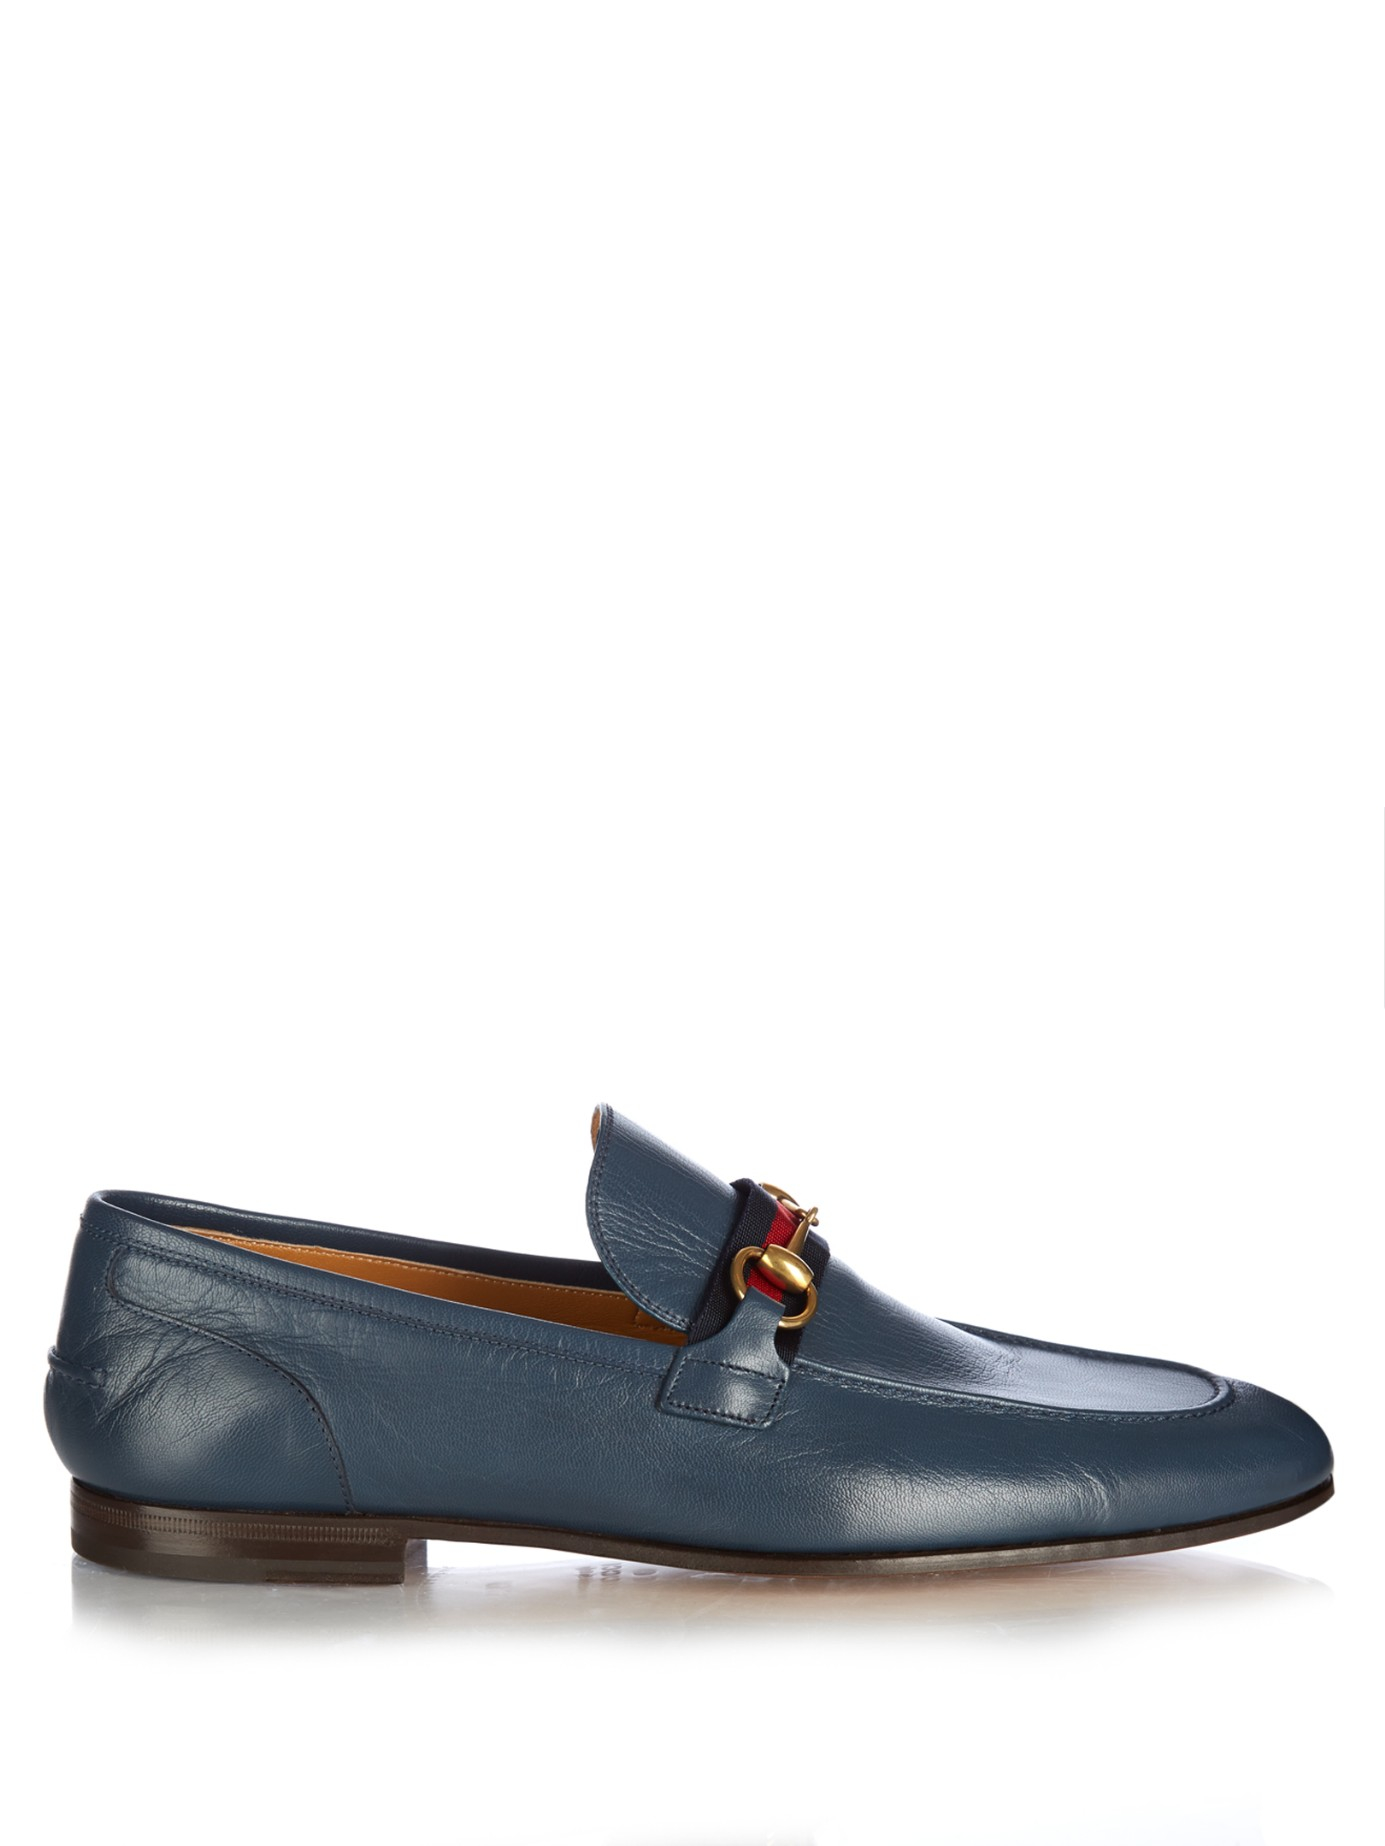 Gucci Horsebit Leather Loafers in Navy (Blue) for Men - Lyst